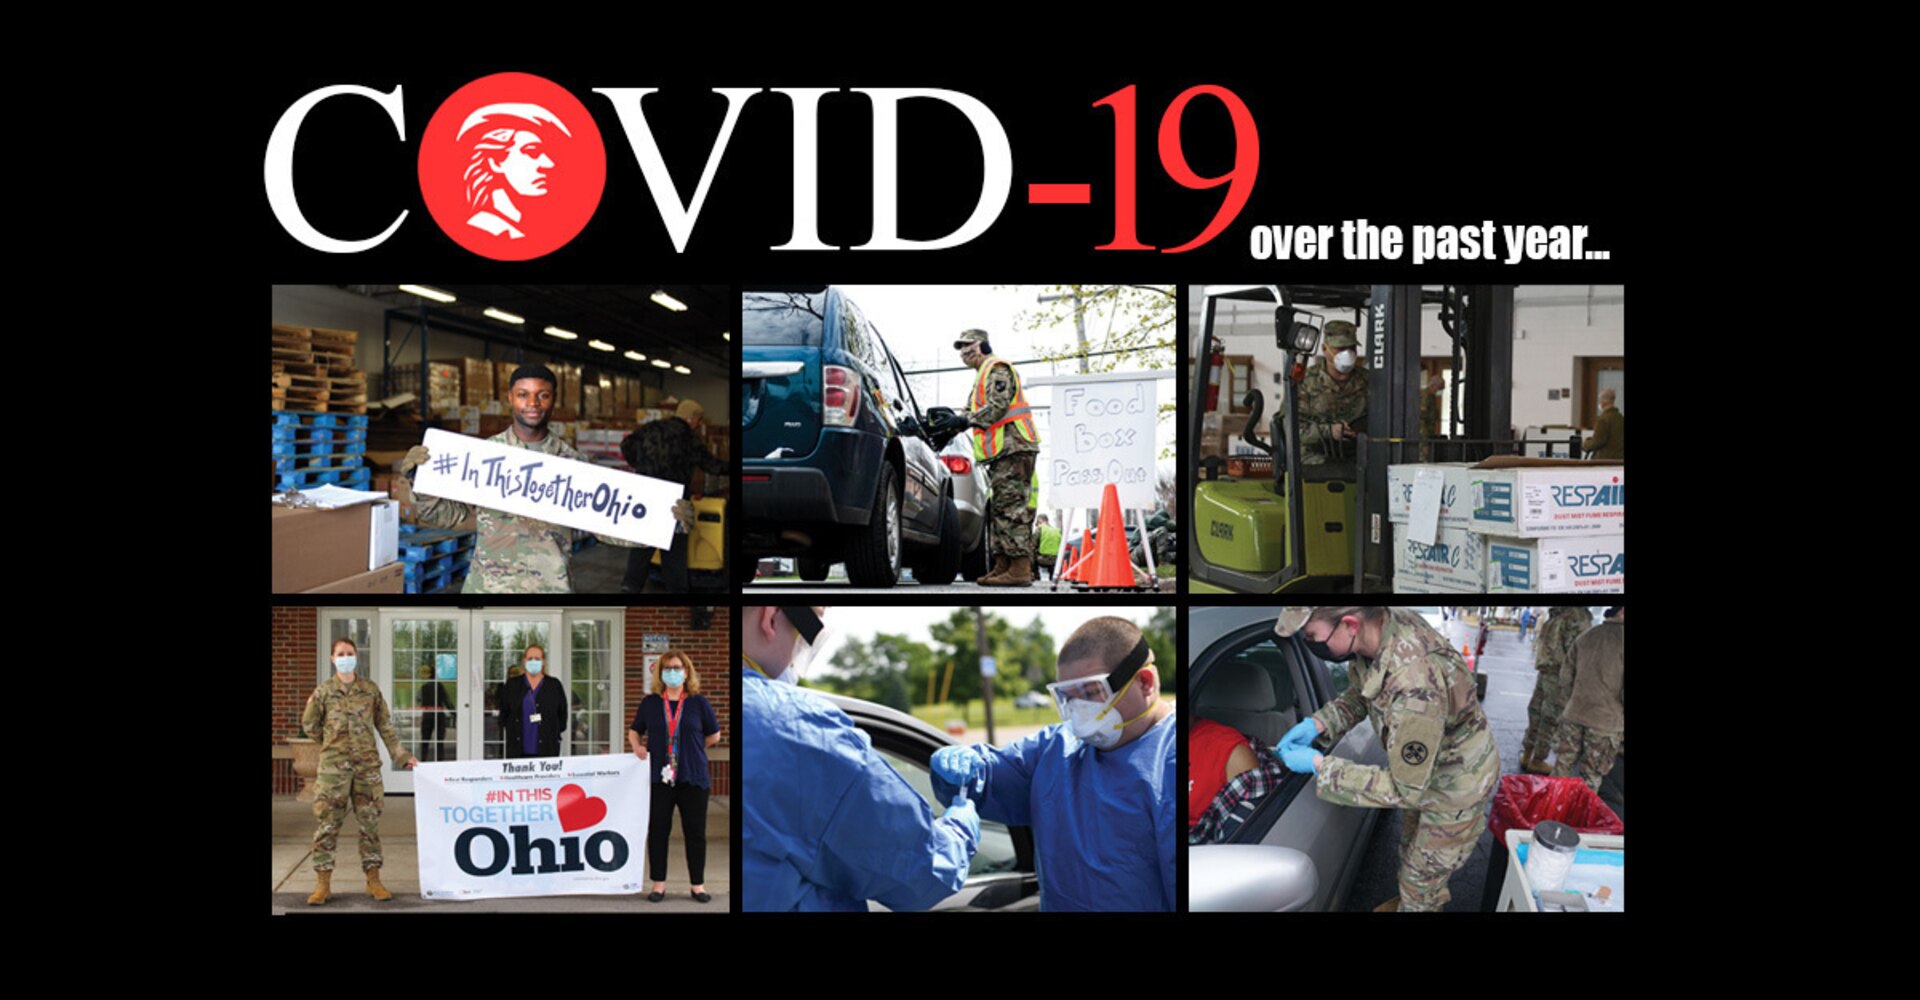 March 23, 2021, marked the one-year anniversary of the Ohio National Guard’s first mission responding to the COVID-19 pandemic. Since then, 5,600 Soldiers, Airmen, and members of the Ohio Military Reserve and Ohio Naval Militia have answered the call to help their communities during nearly 70 missions.